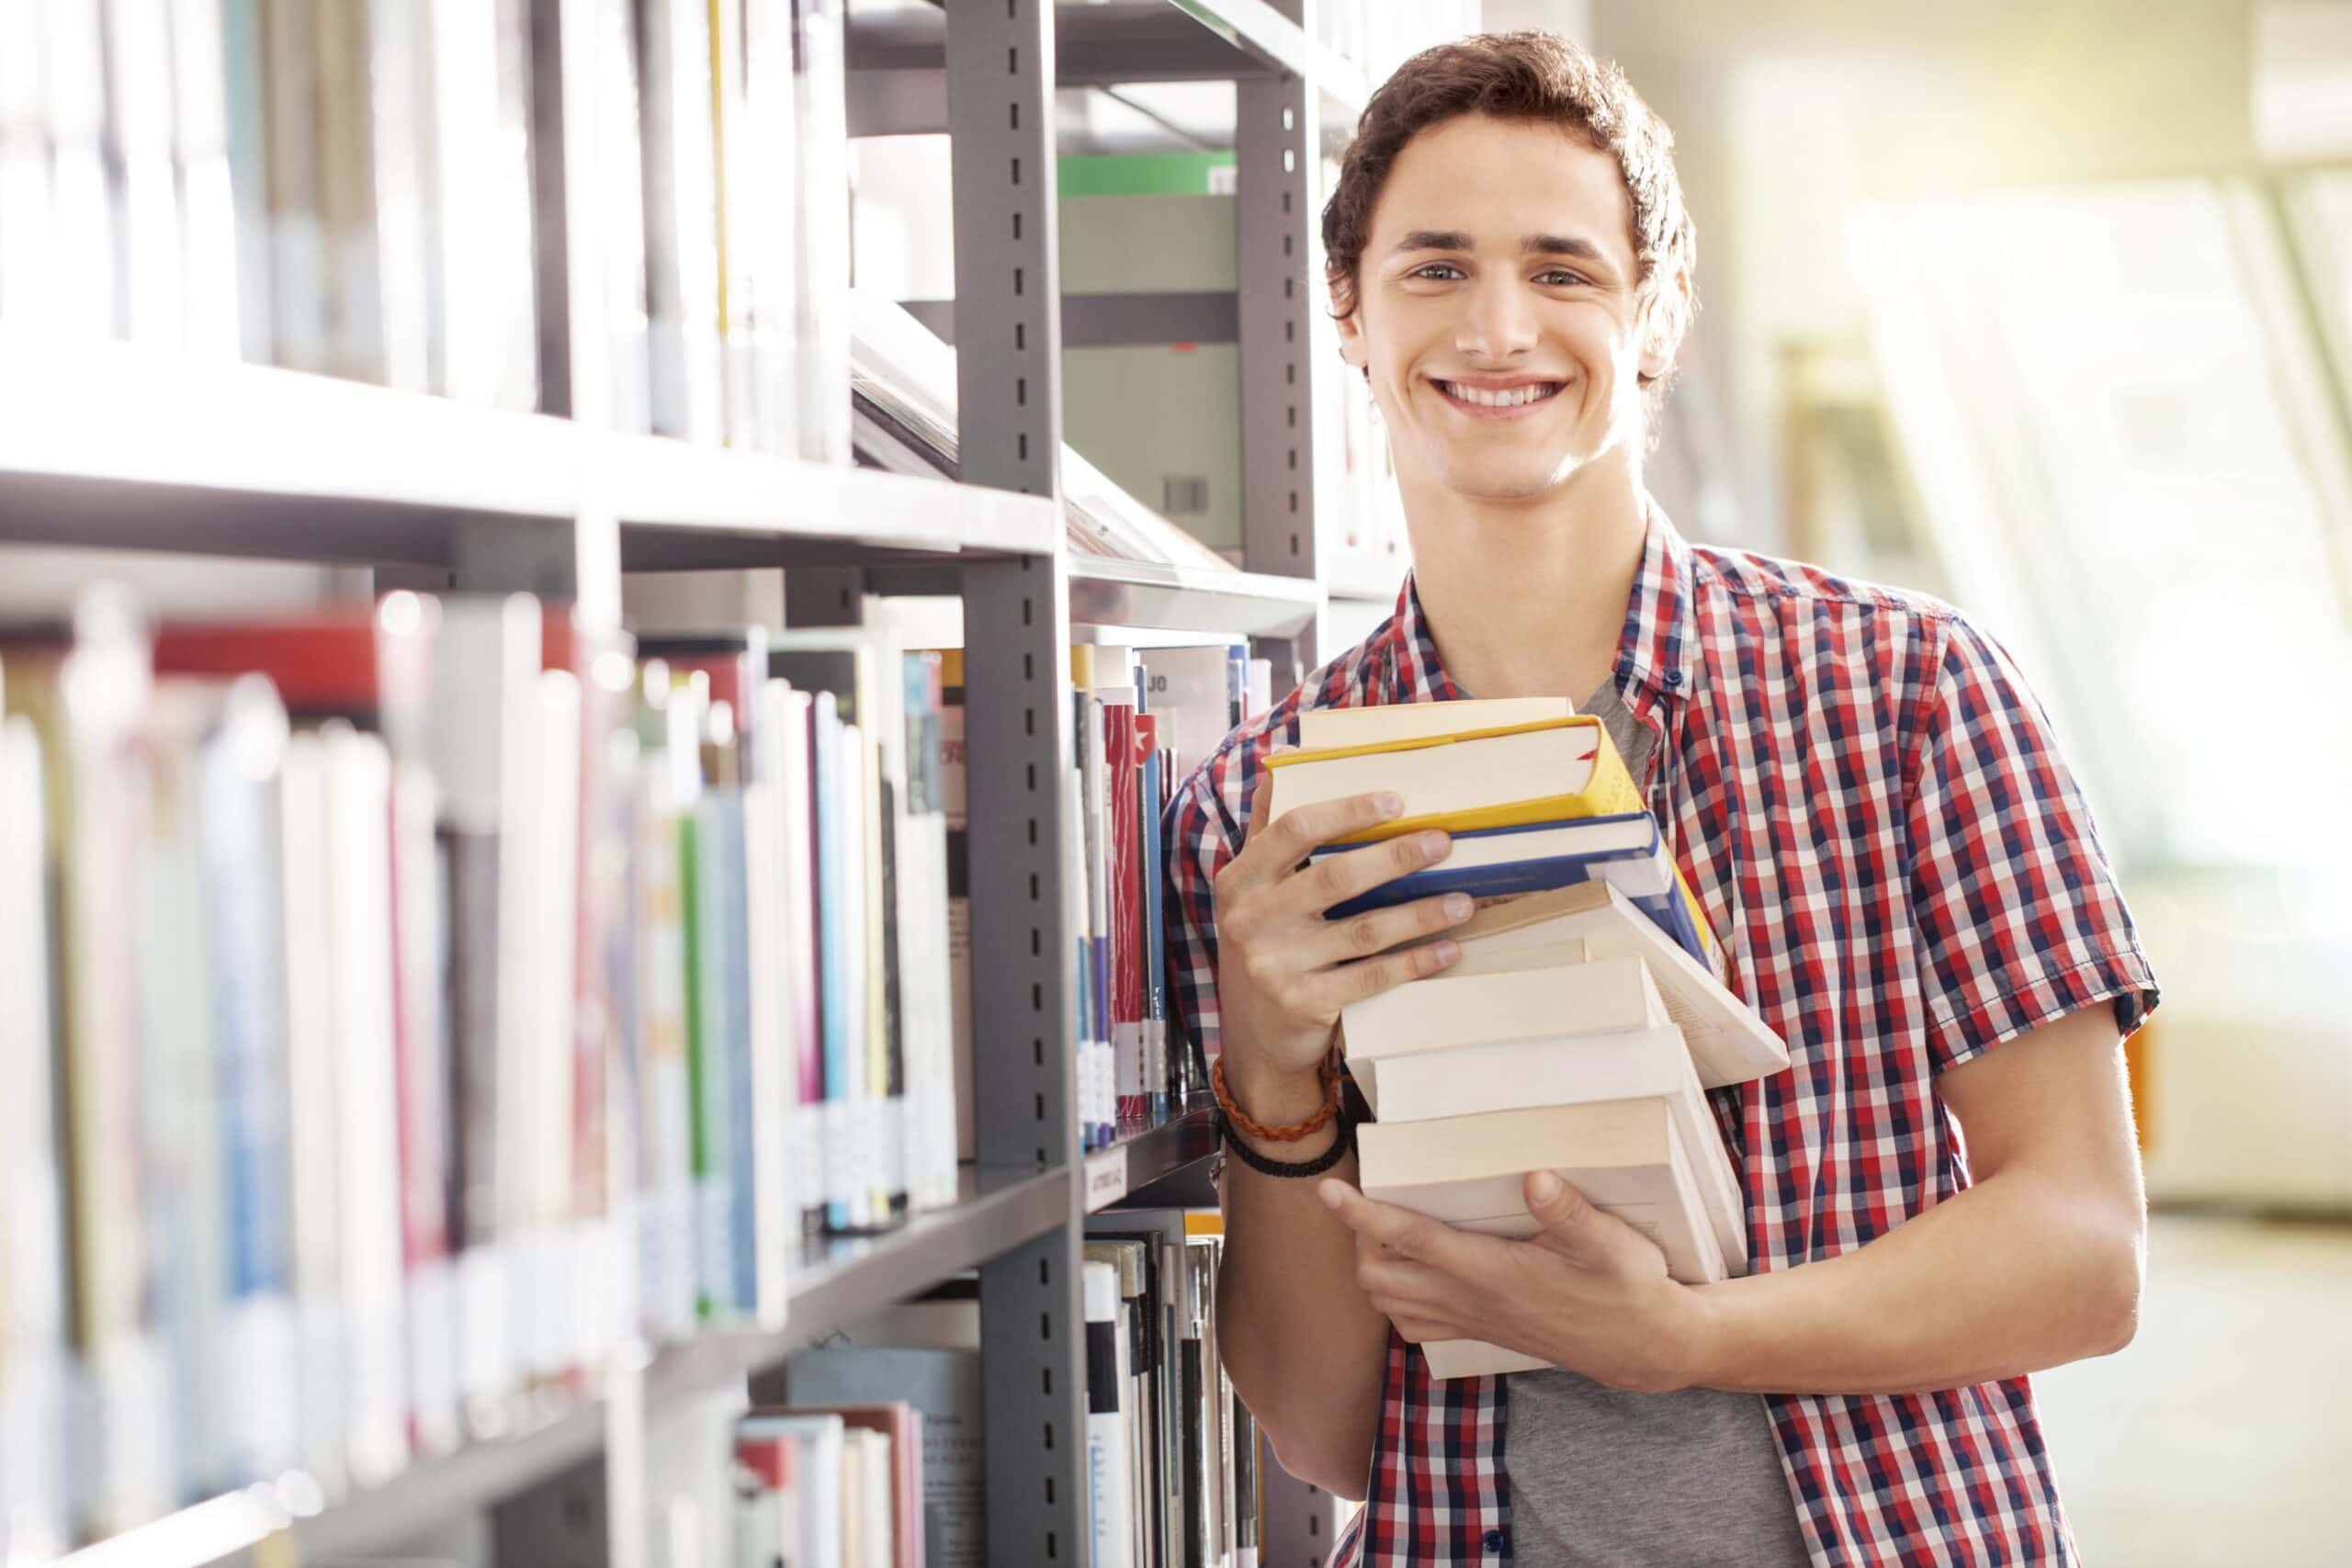 Portrait of a young student holding books standing by bookshelf in a library.